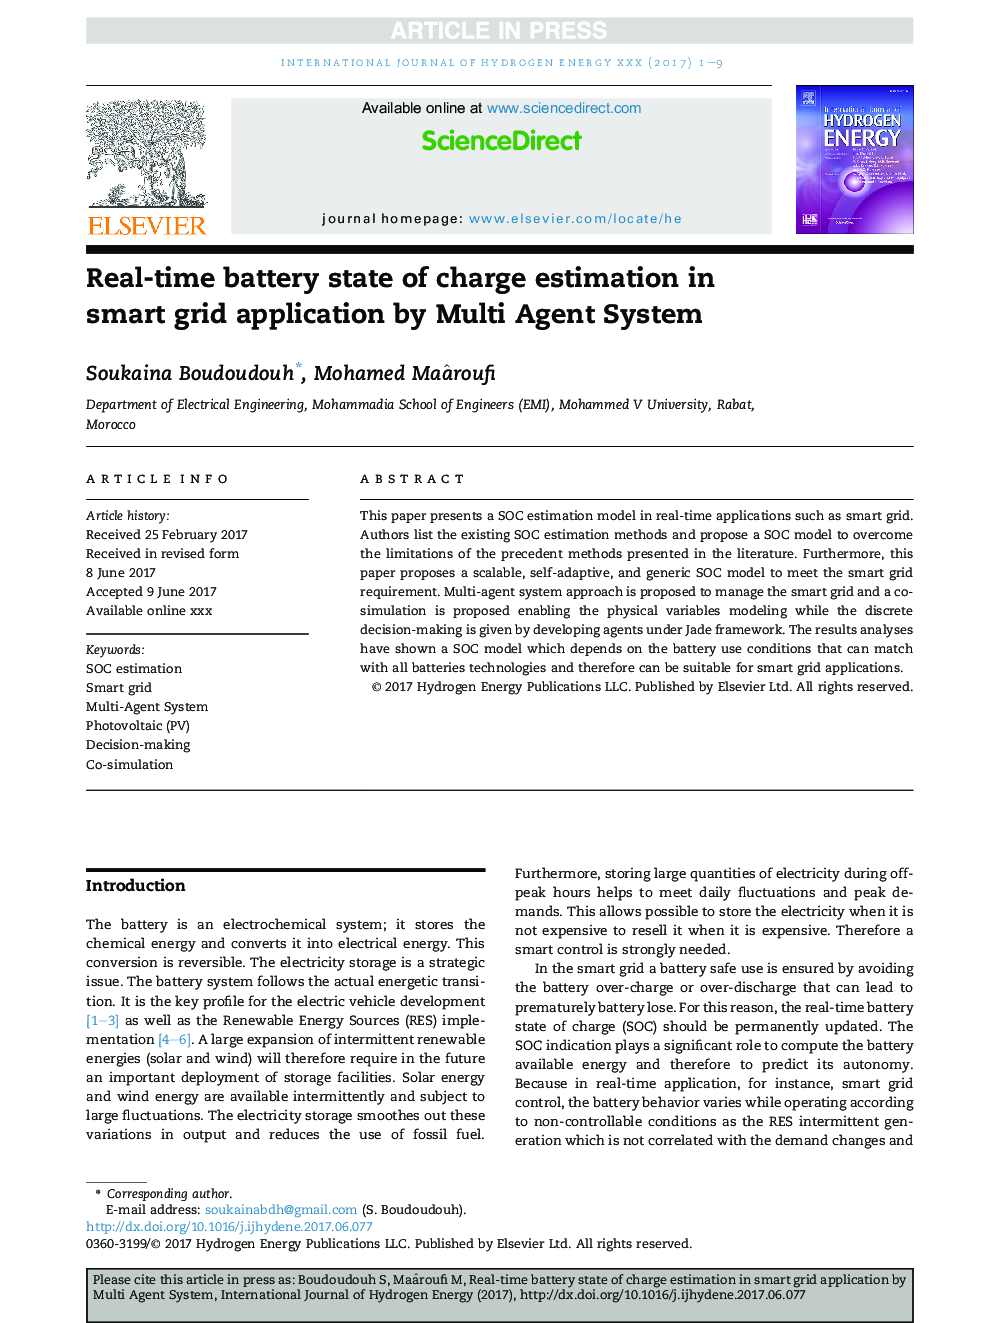 Real-time battery state of charge estimation in smart grid application by Multi Agent System